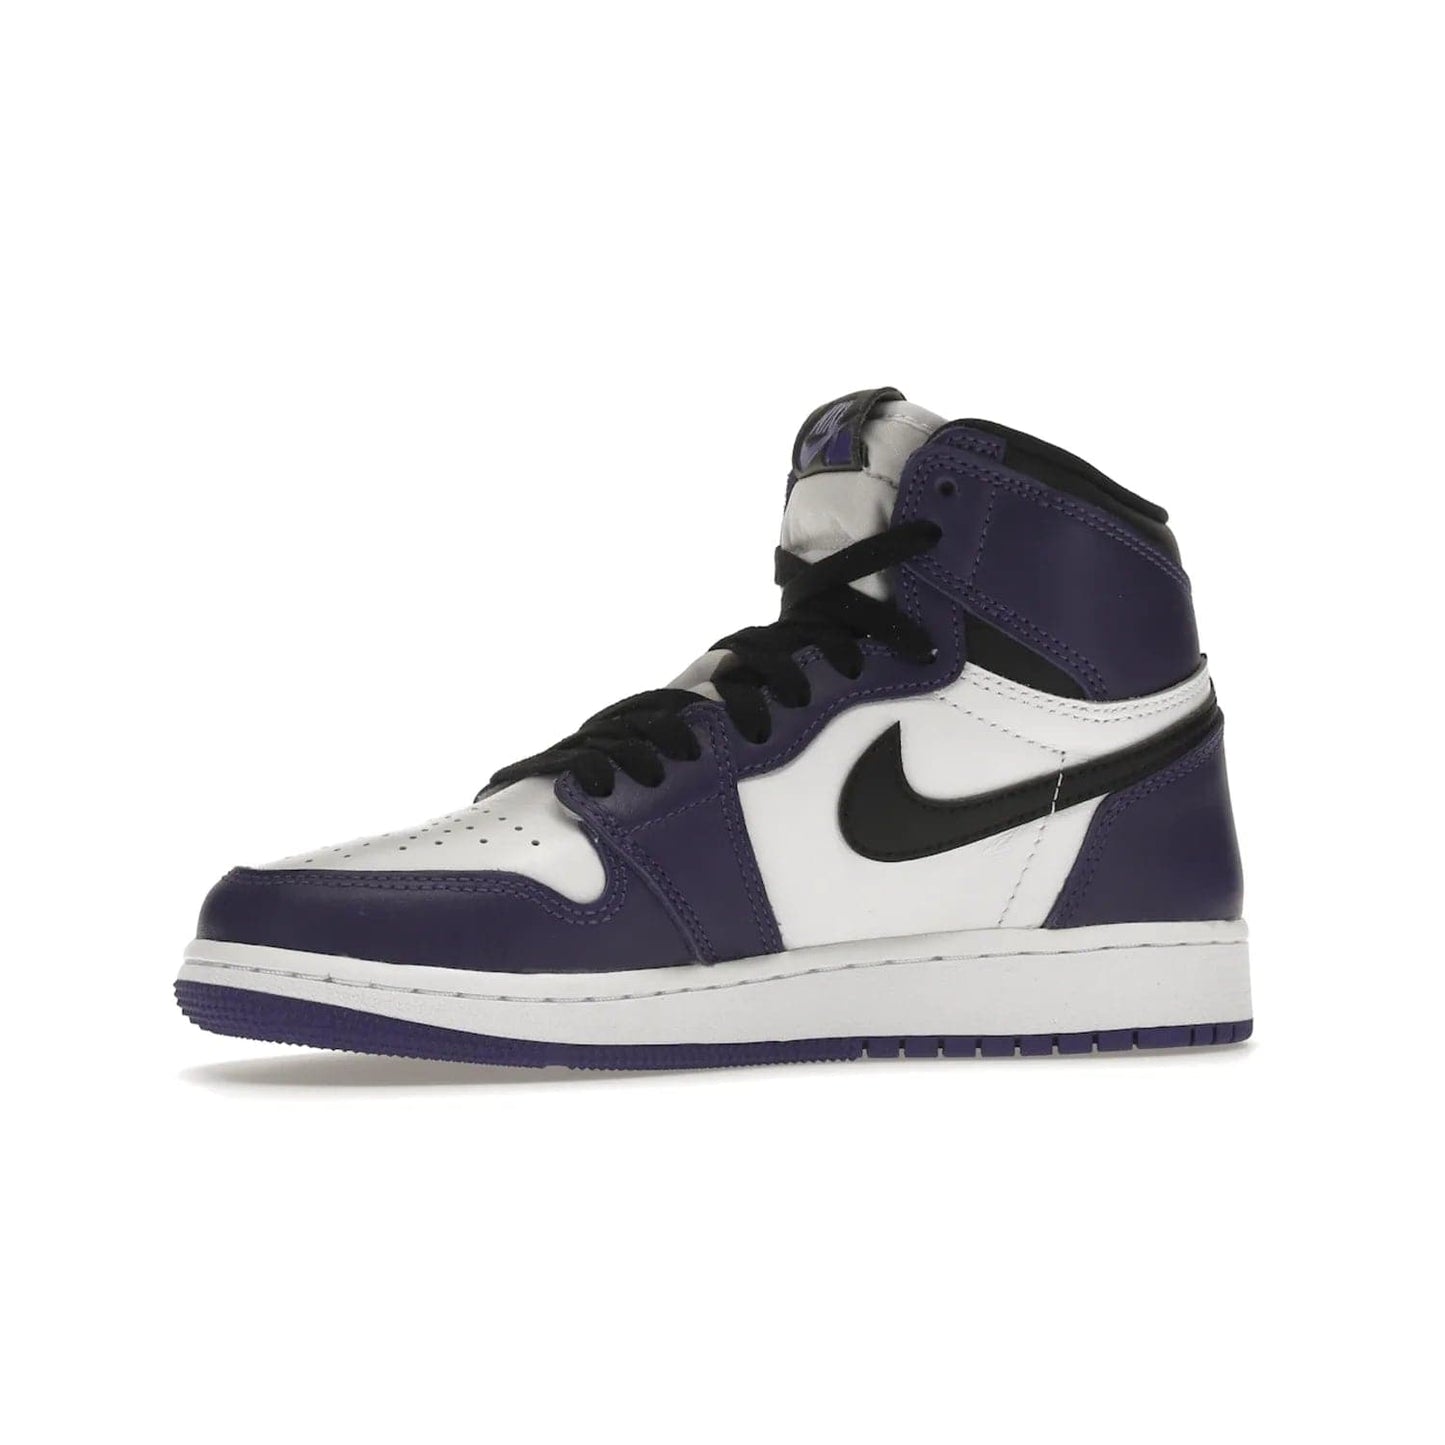 Jordan 1 Retro High Court Purple White (GS) - Image 17 - Only at www.BallersClubKickz.com - The Air Jordan 1 Retro High Court Purple is here and young sneaker heads can show off classic style. Features a white tumbled leather upper, black swoosh, purple overlays, black collar with purple overlay, white tongue, black patch with purple Nike Air logo and swoosh, white midsole, and purple rubber outsole with circular pattern.